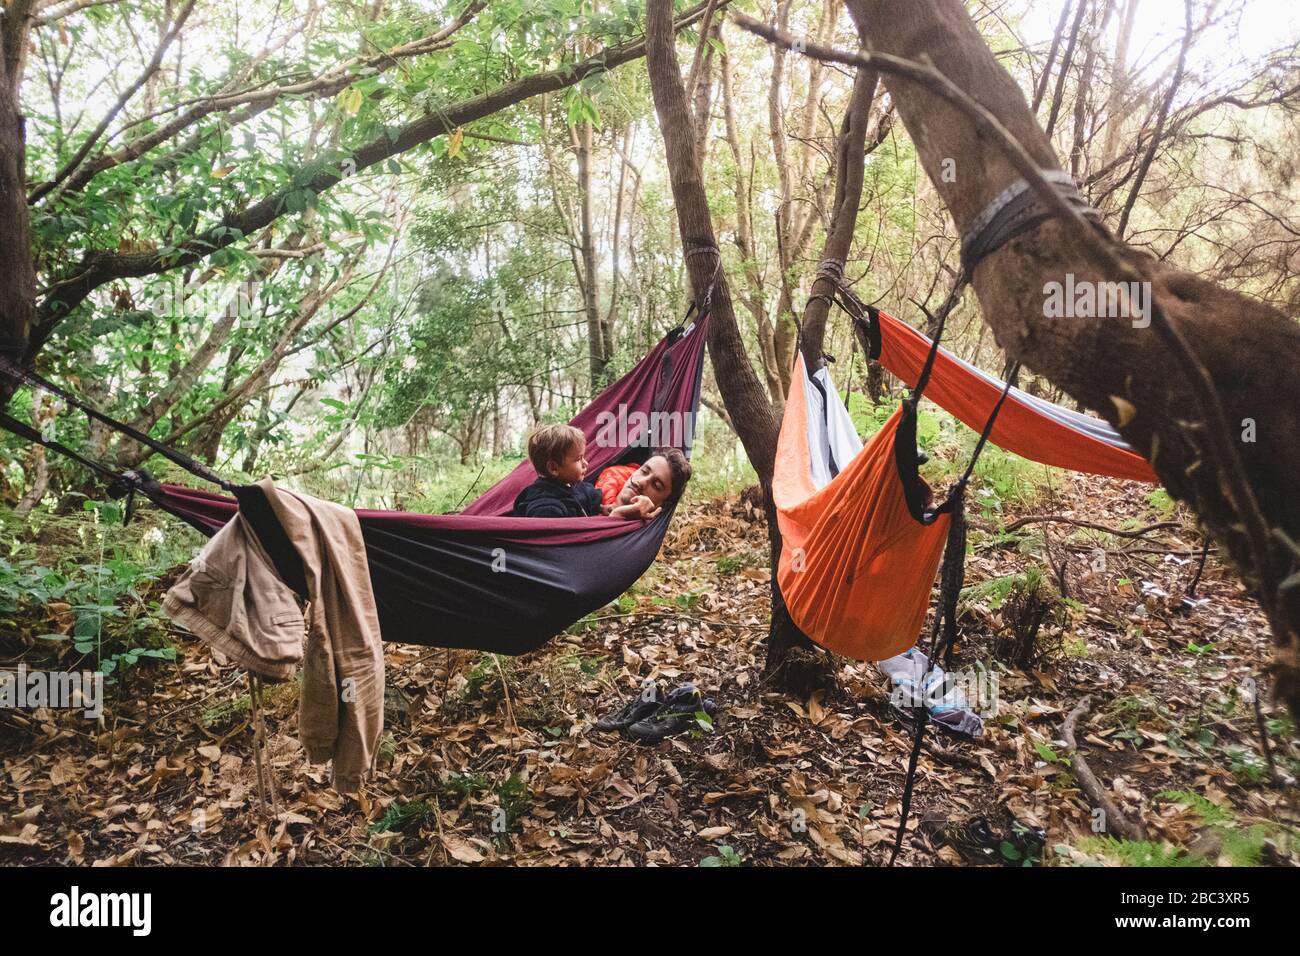 A man and young kid lying in a hammock in the forest Stock Photo